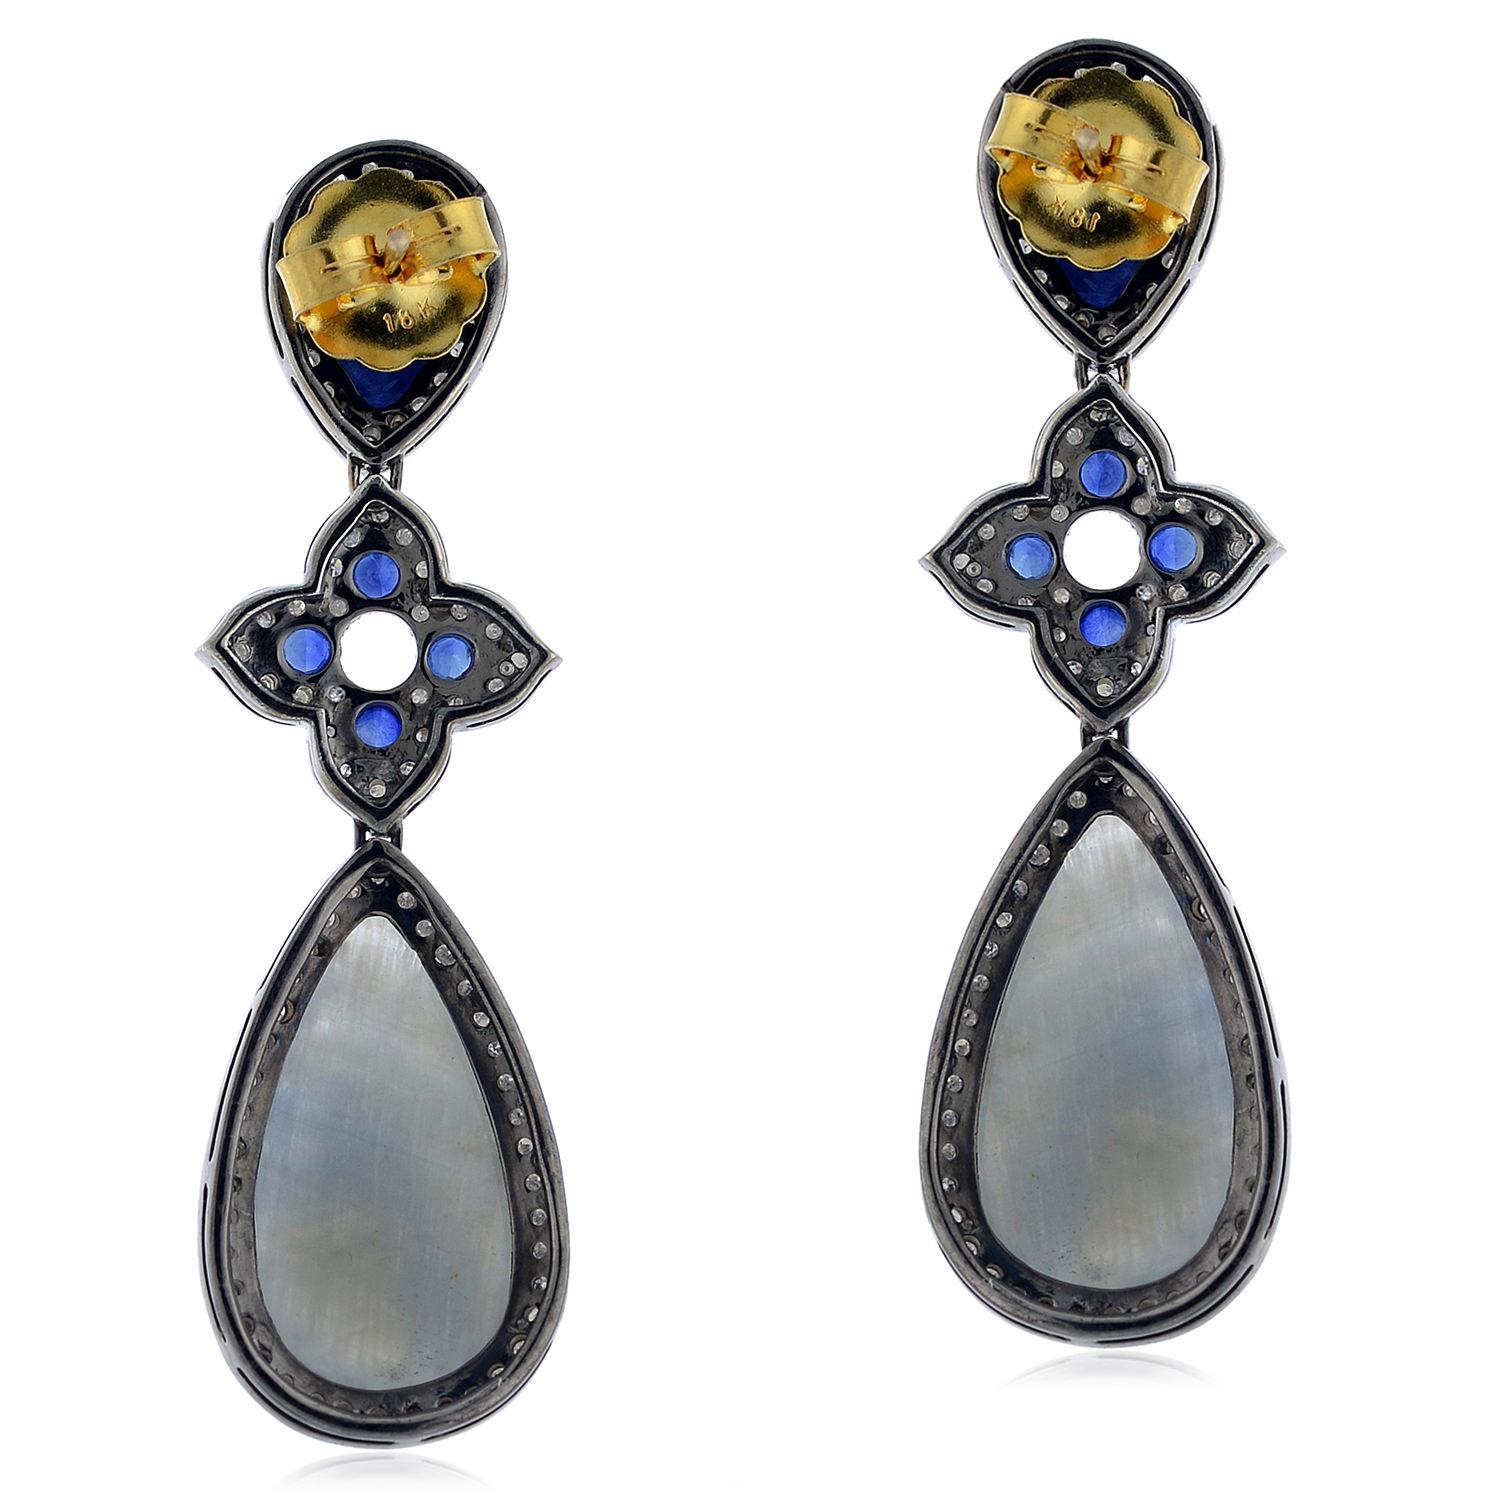 Two-tier Sapphire Earring with Diamond Motif in 18K Gold and silver is pretty and perfect to pair with semi-casuals and any fun event.

Closure: Push Post

18kt Gold:1.98gms
Diamond:1.6cts
Silver:8.2gms
Sapphire:27.2cts

